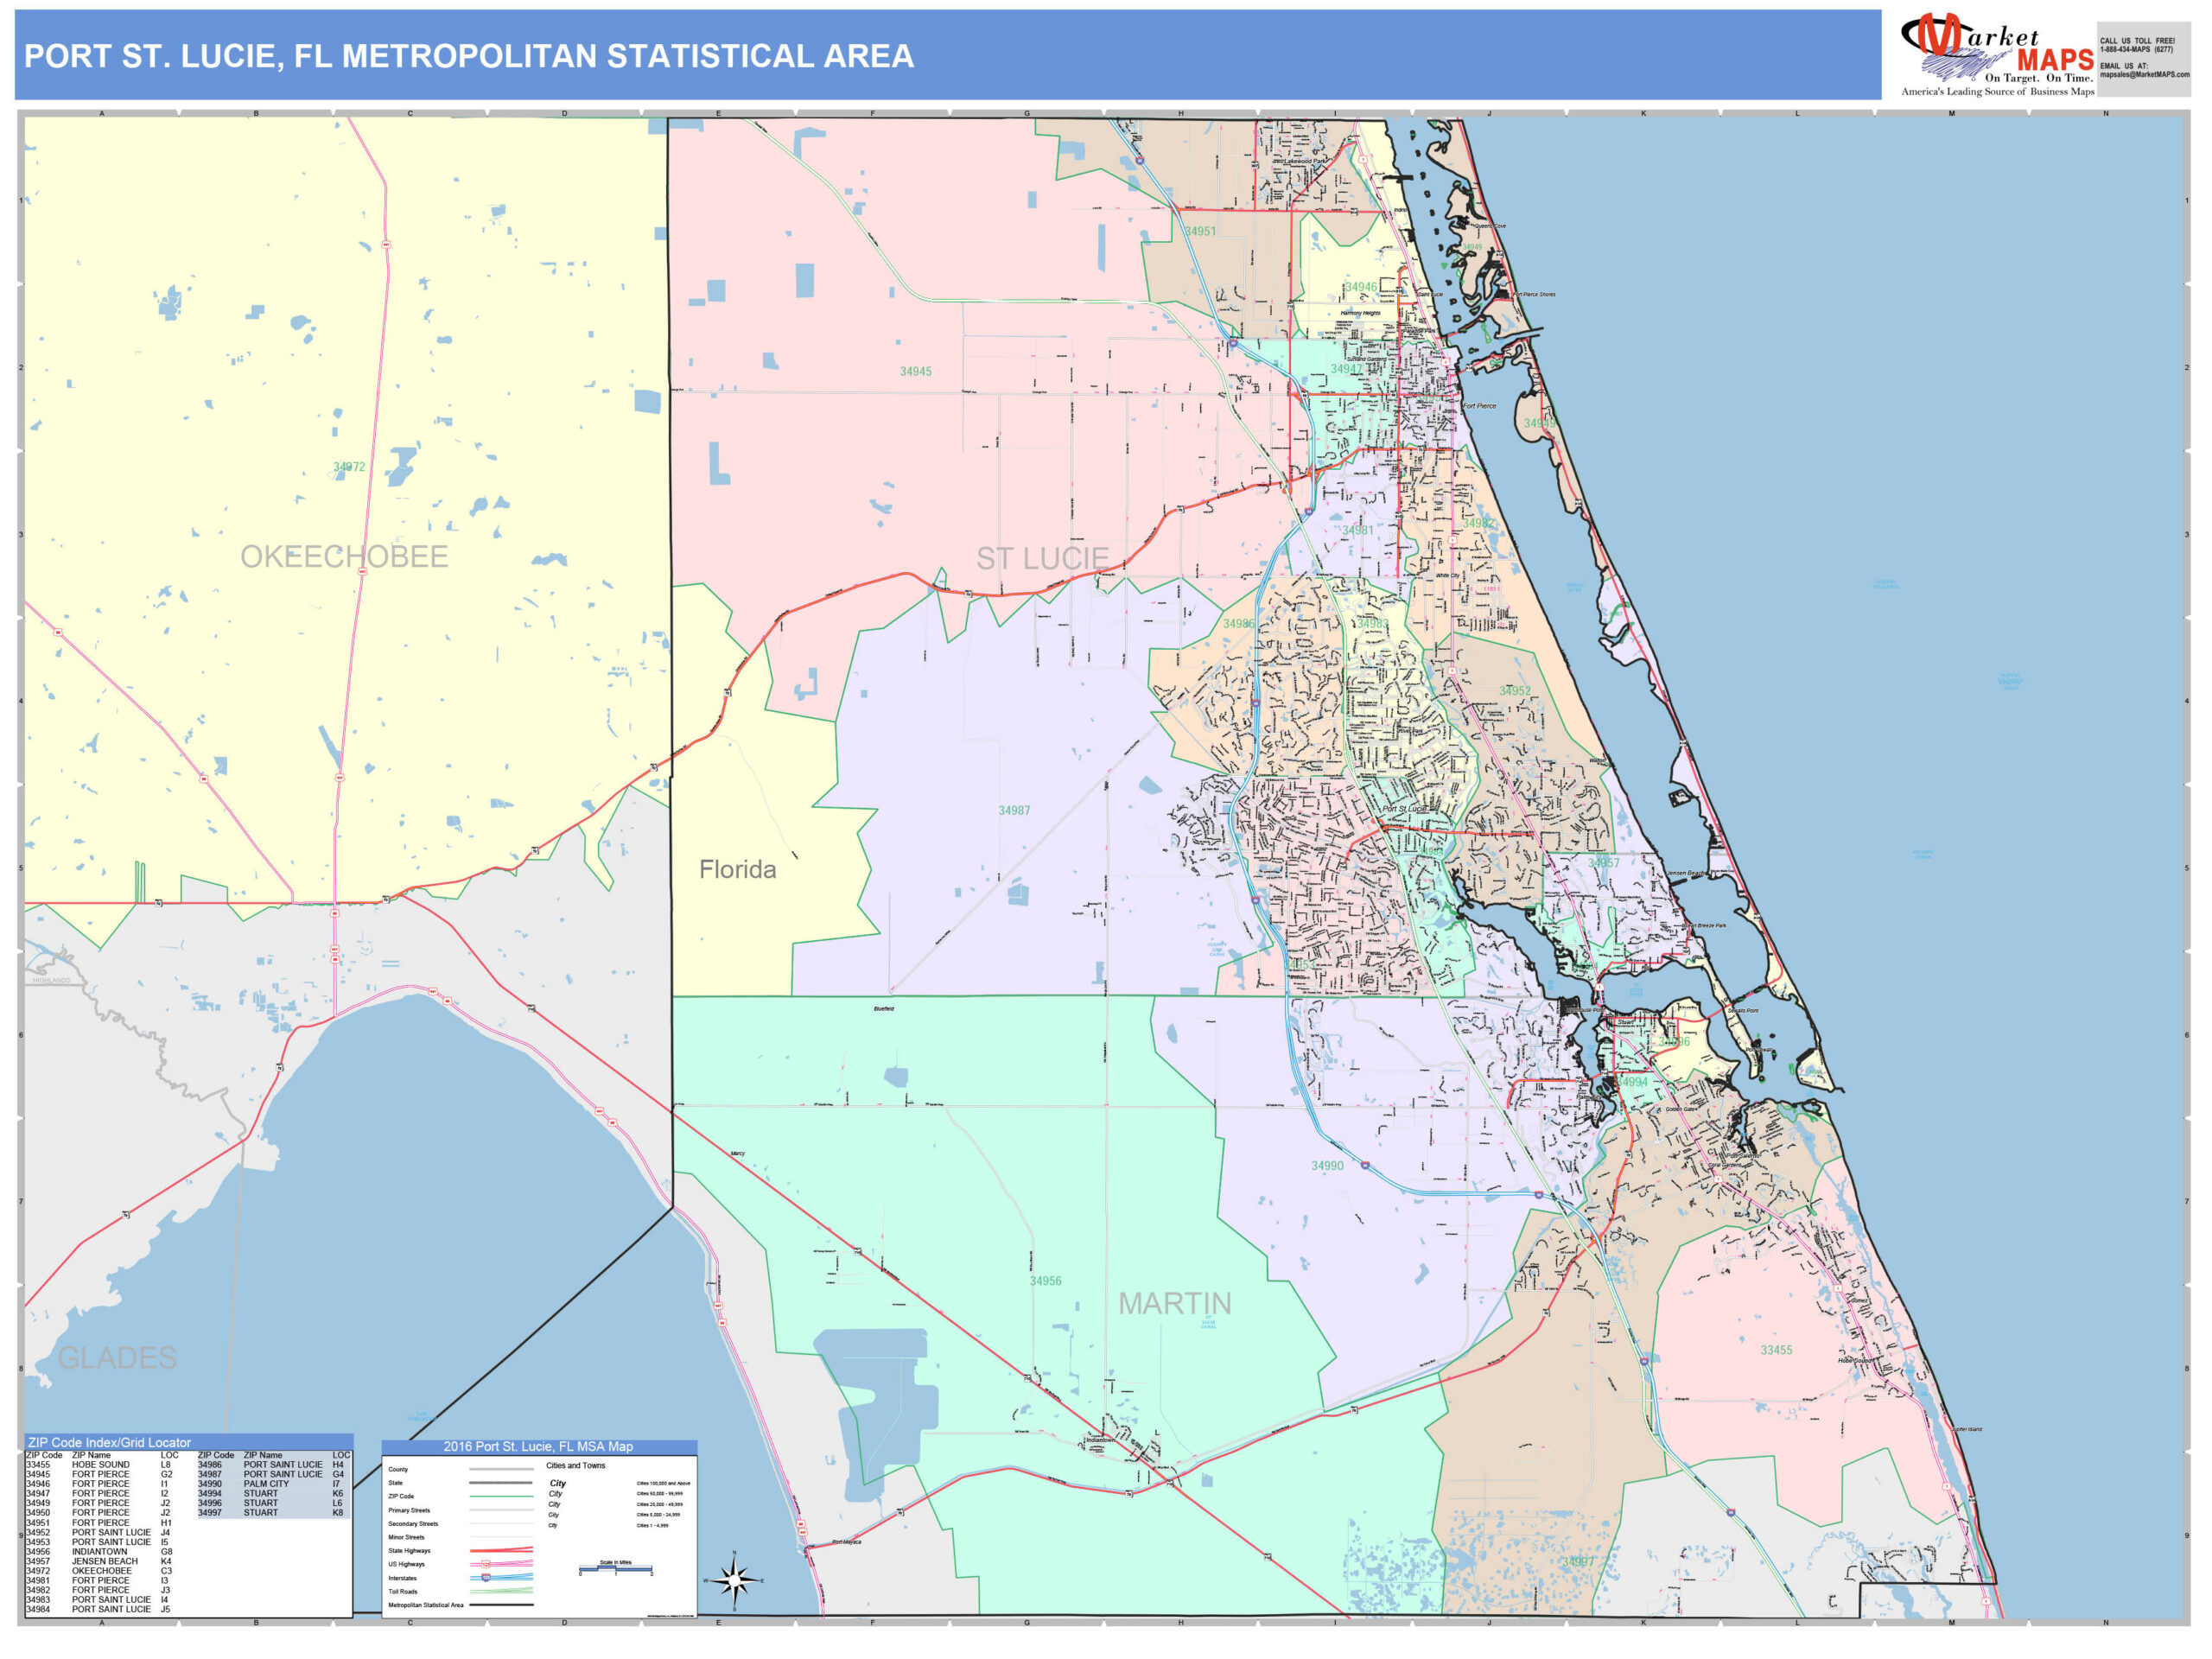 Port St Lucie FL Metro Area Wall Map Color Cast Style By MarketMAPS 